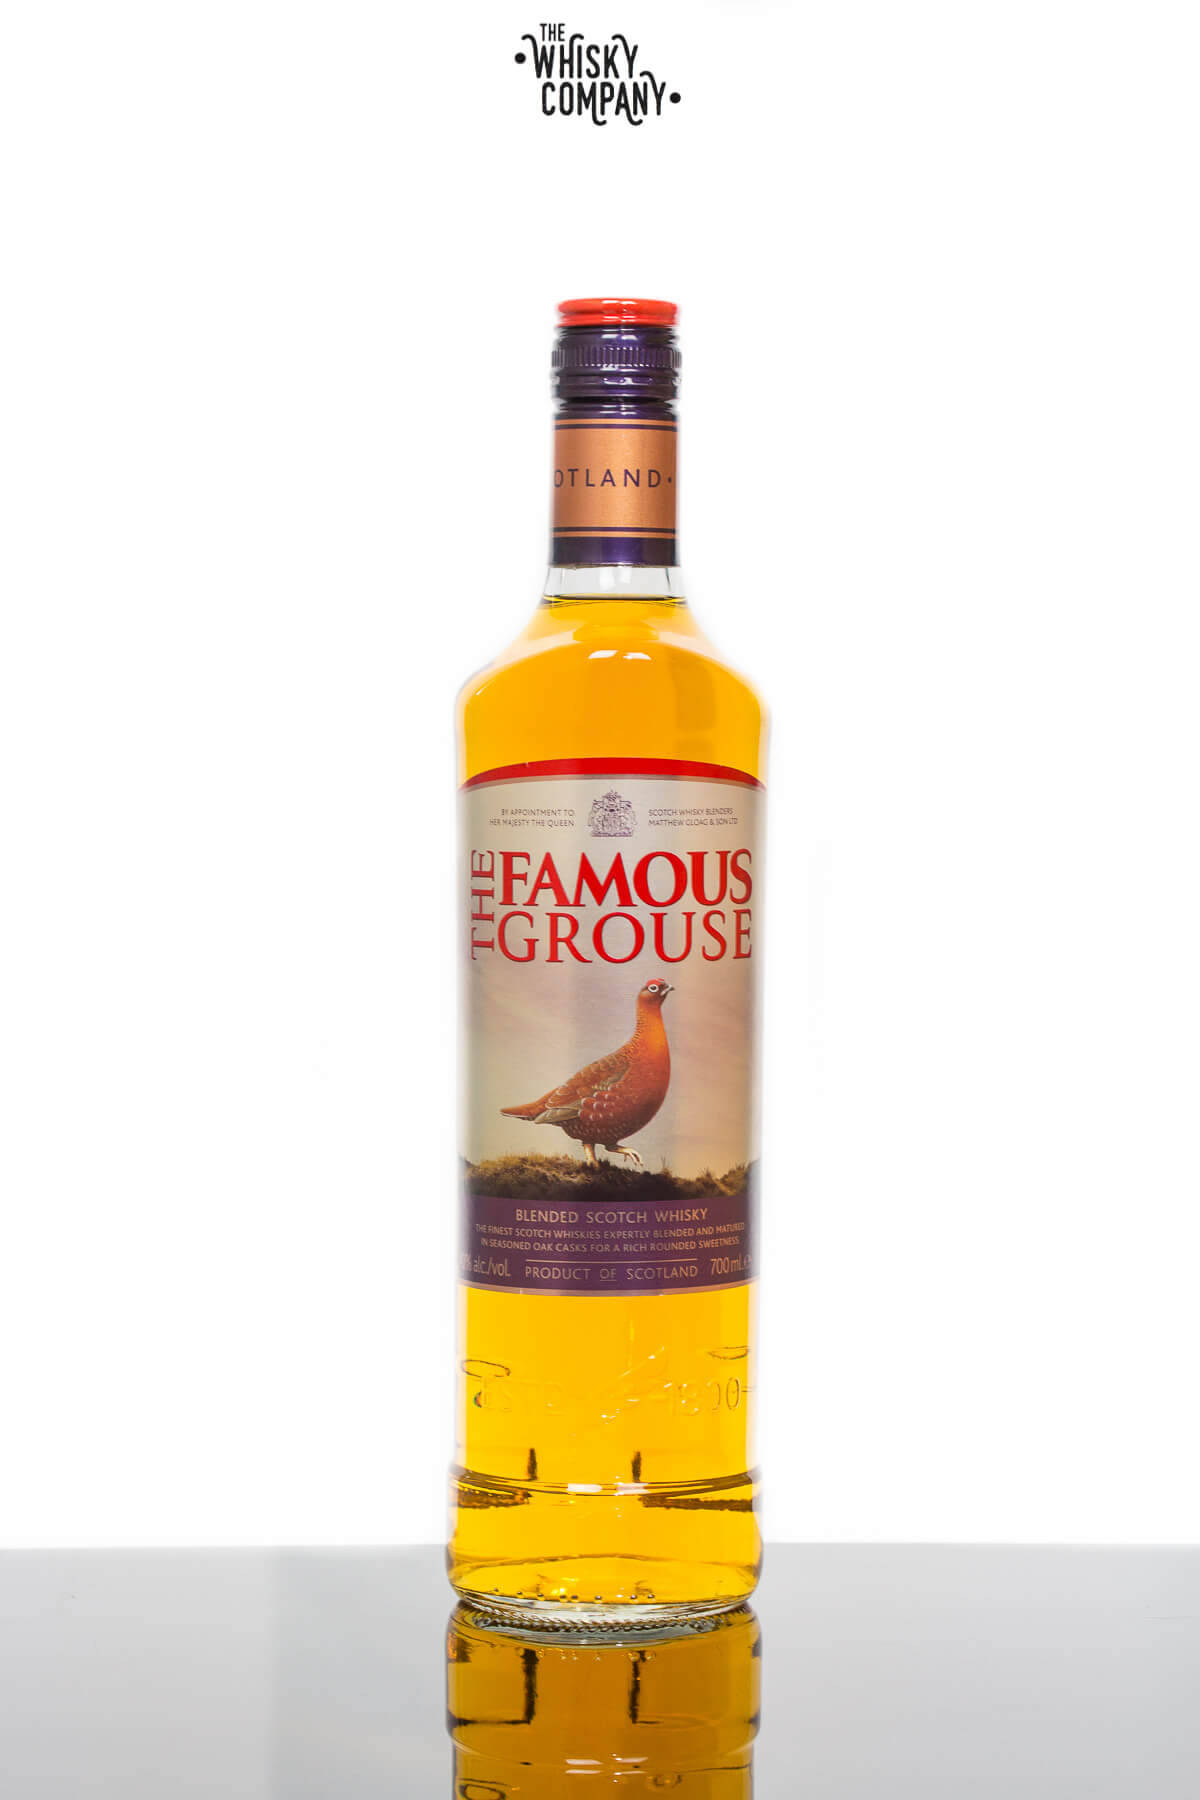 Famousgrouse Whisky Company Plakat Wallpaper